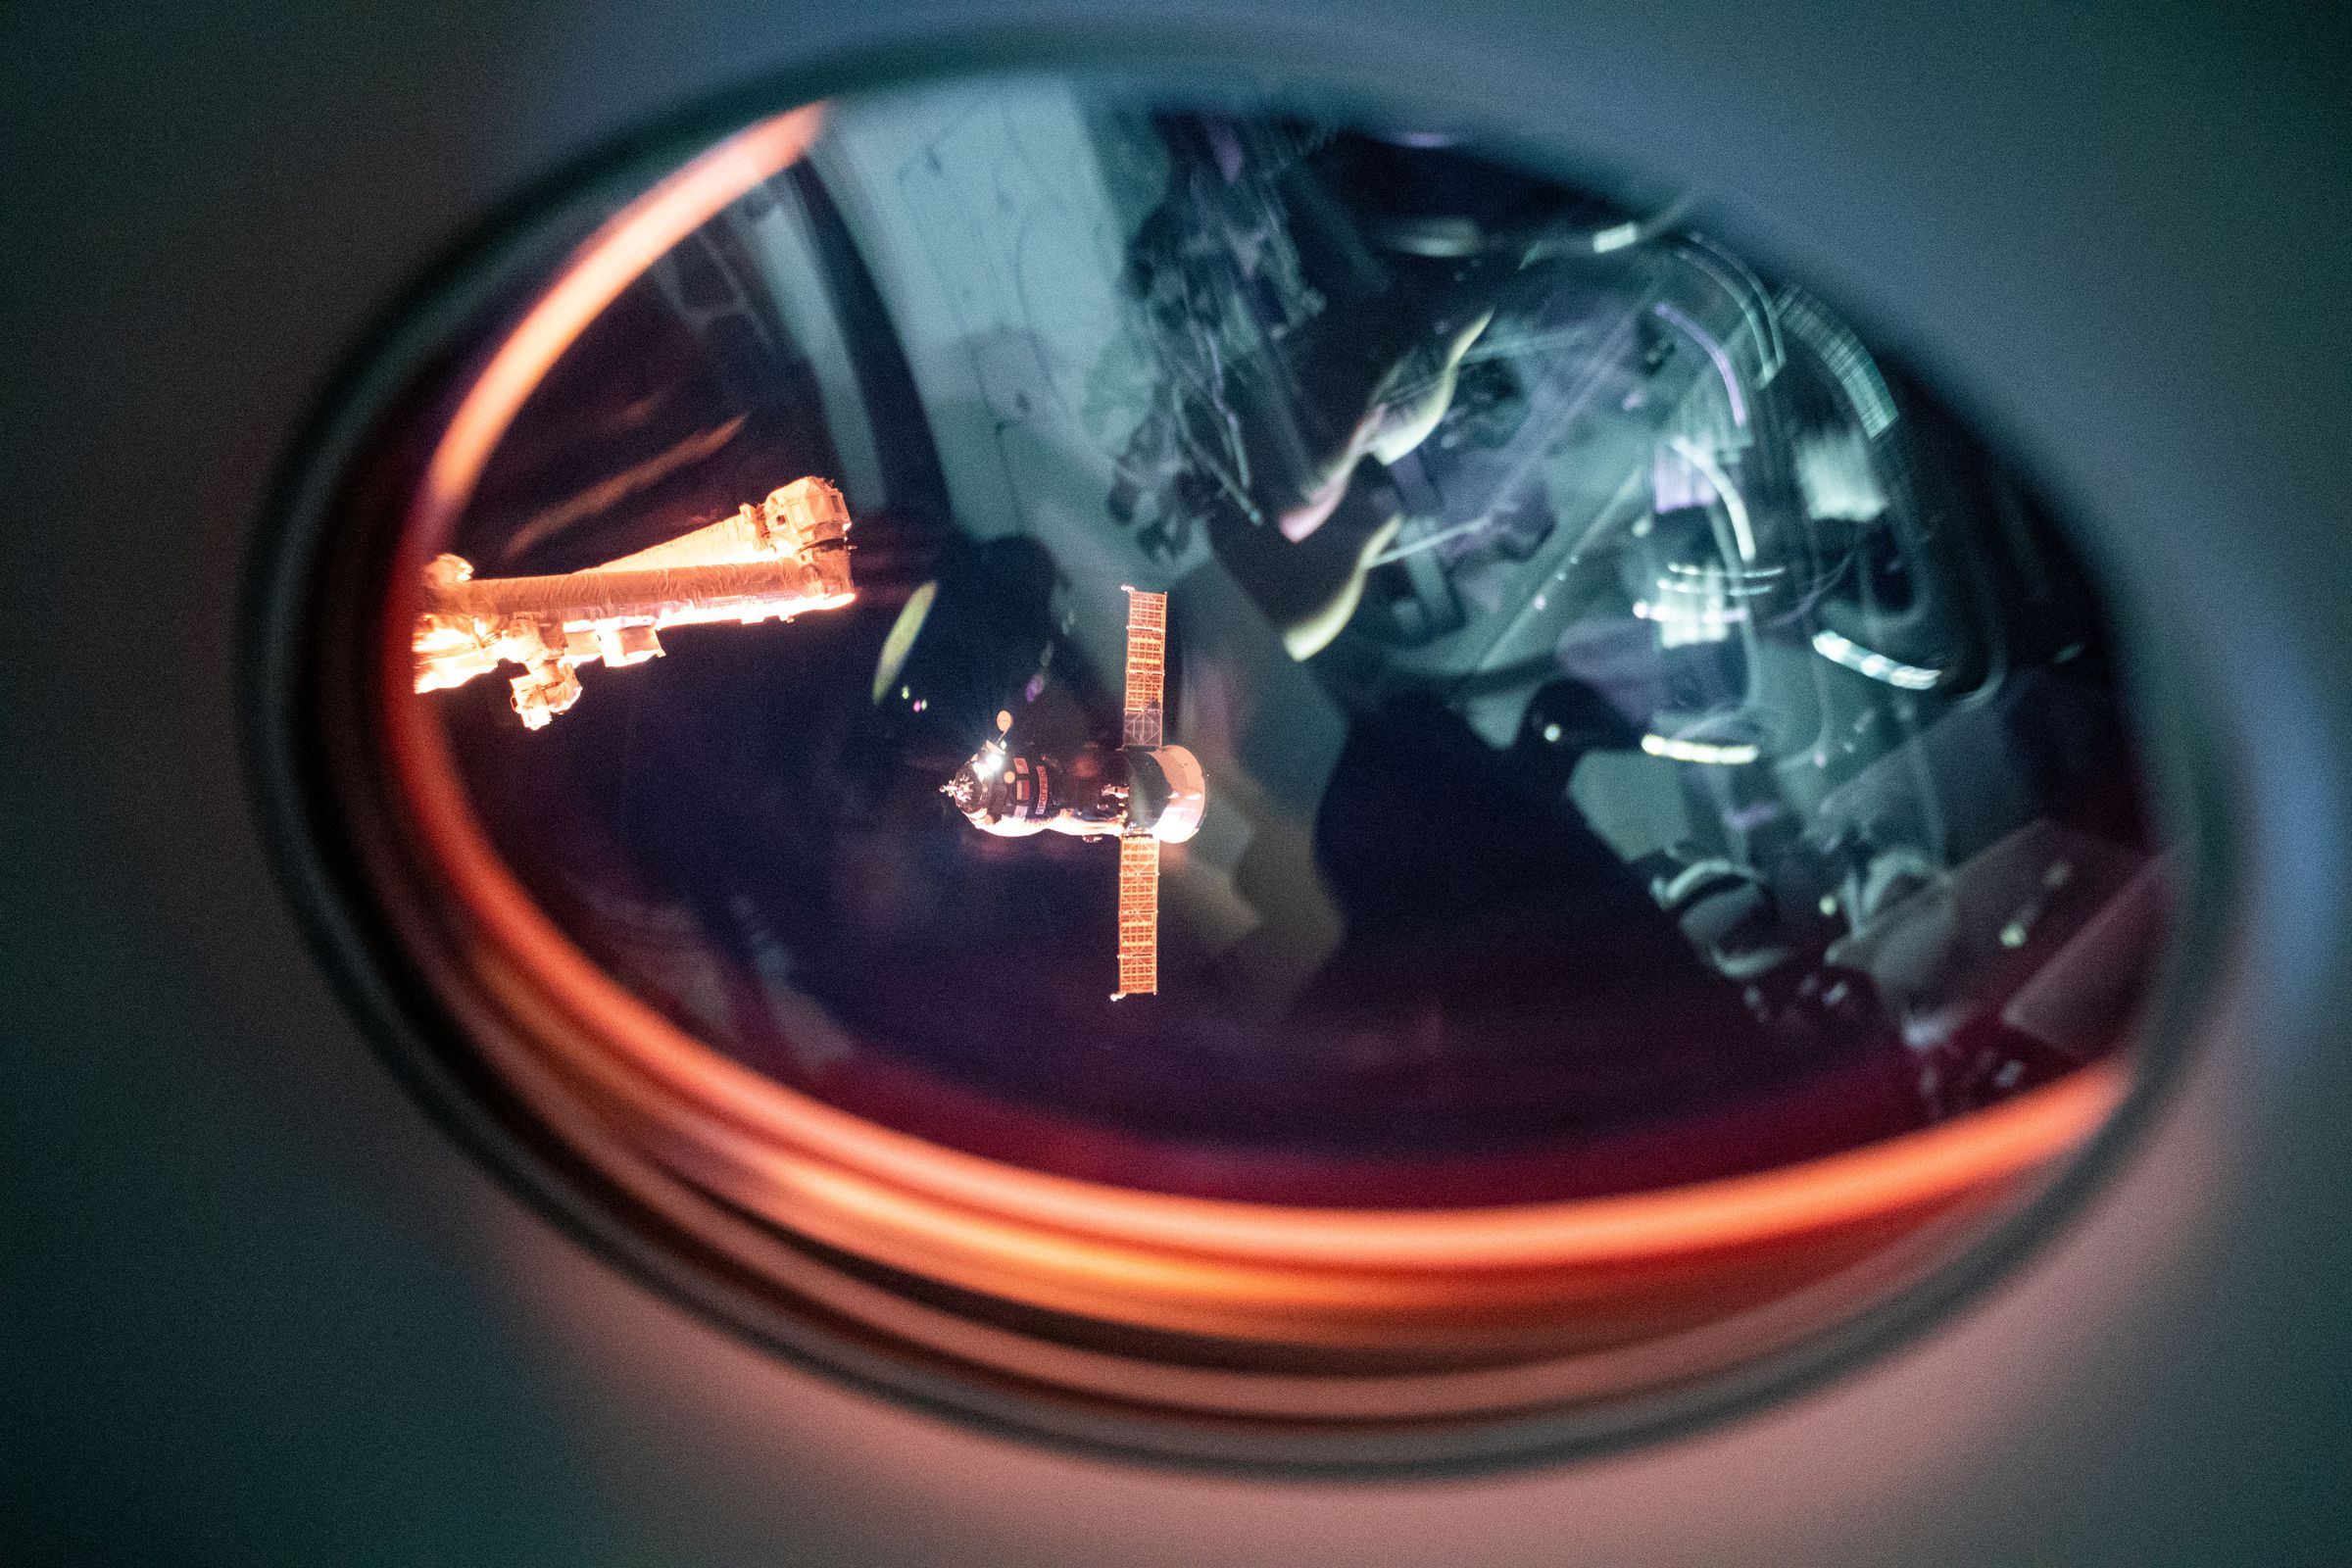 Russia’s Progress 77 cargo resupply ship is seen approaching the International Space Station through the window of SpaceX’s Crew Dragon spacecraft.